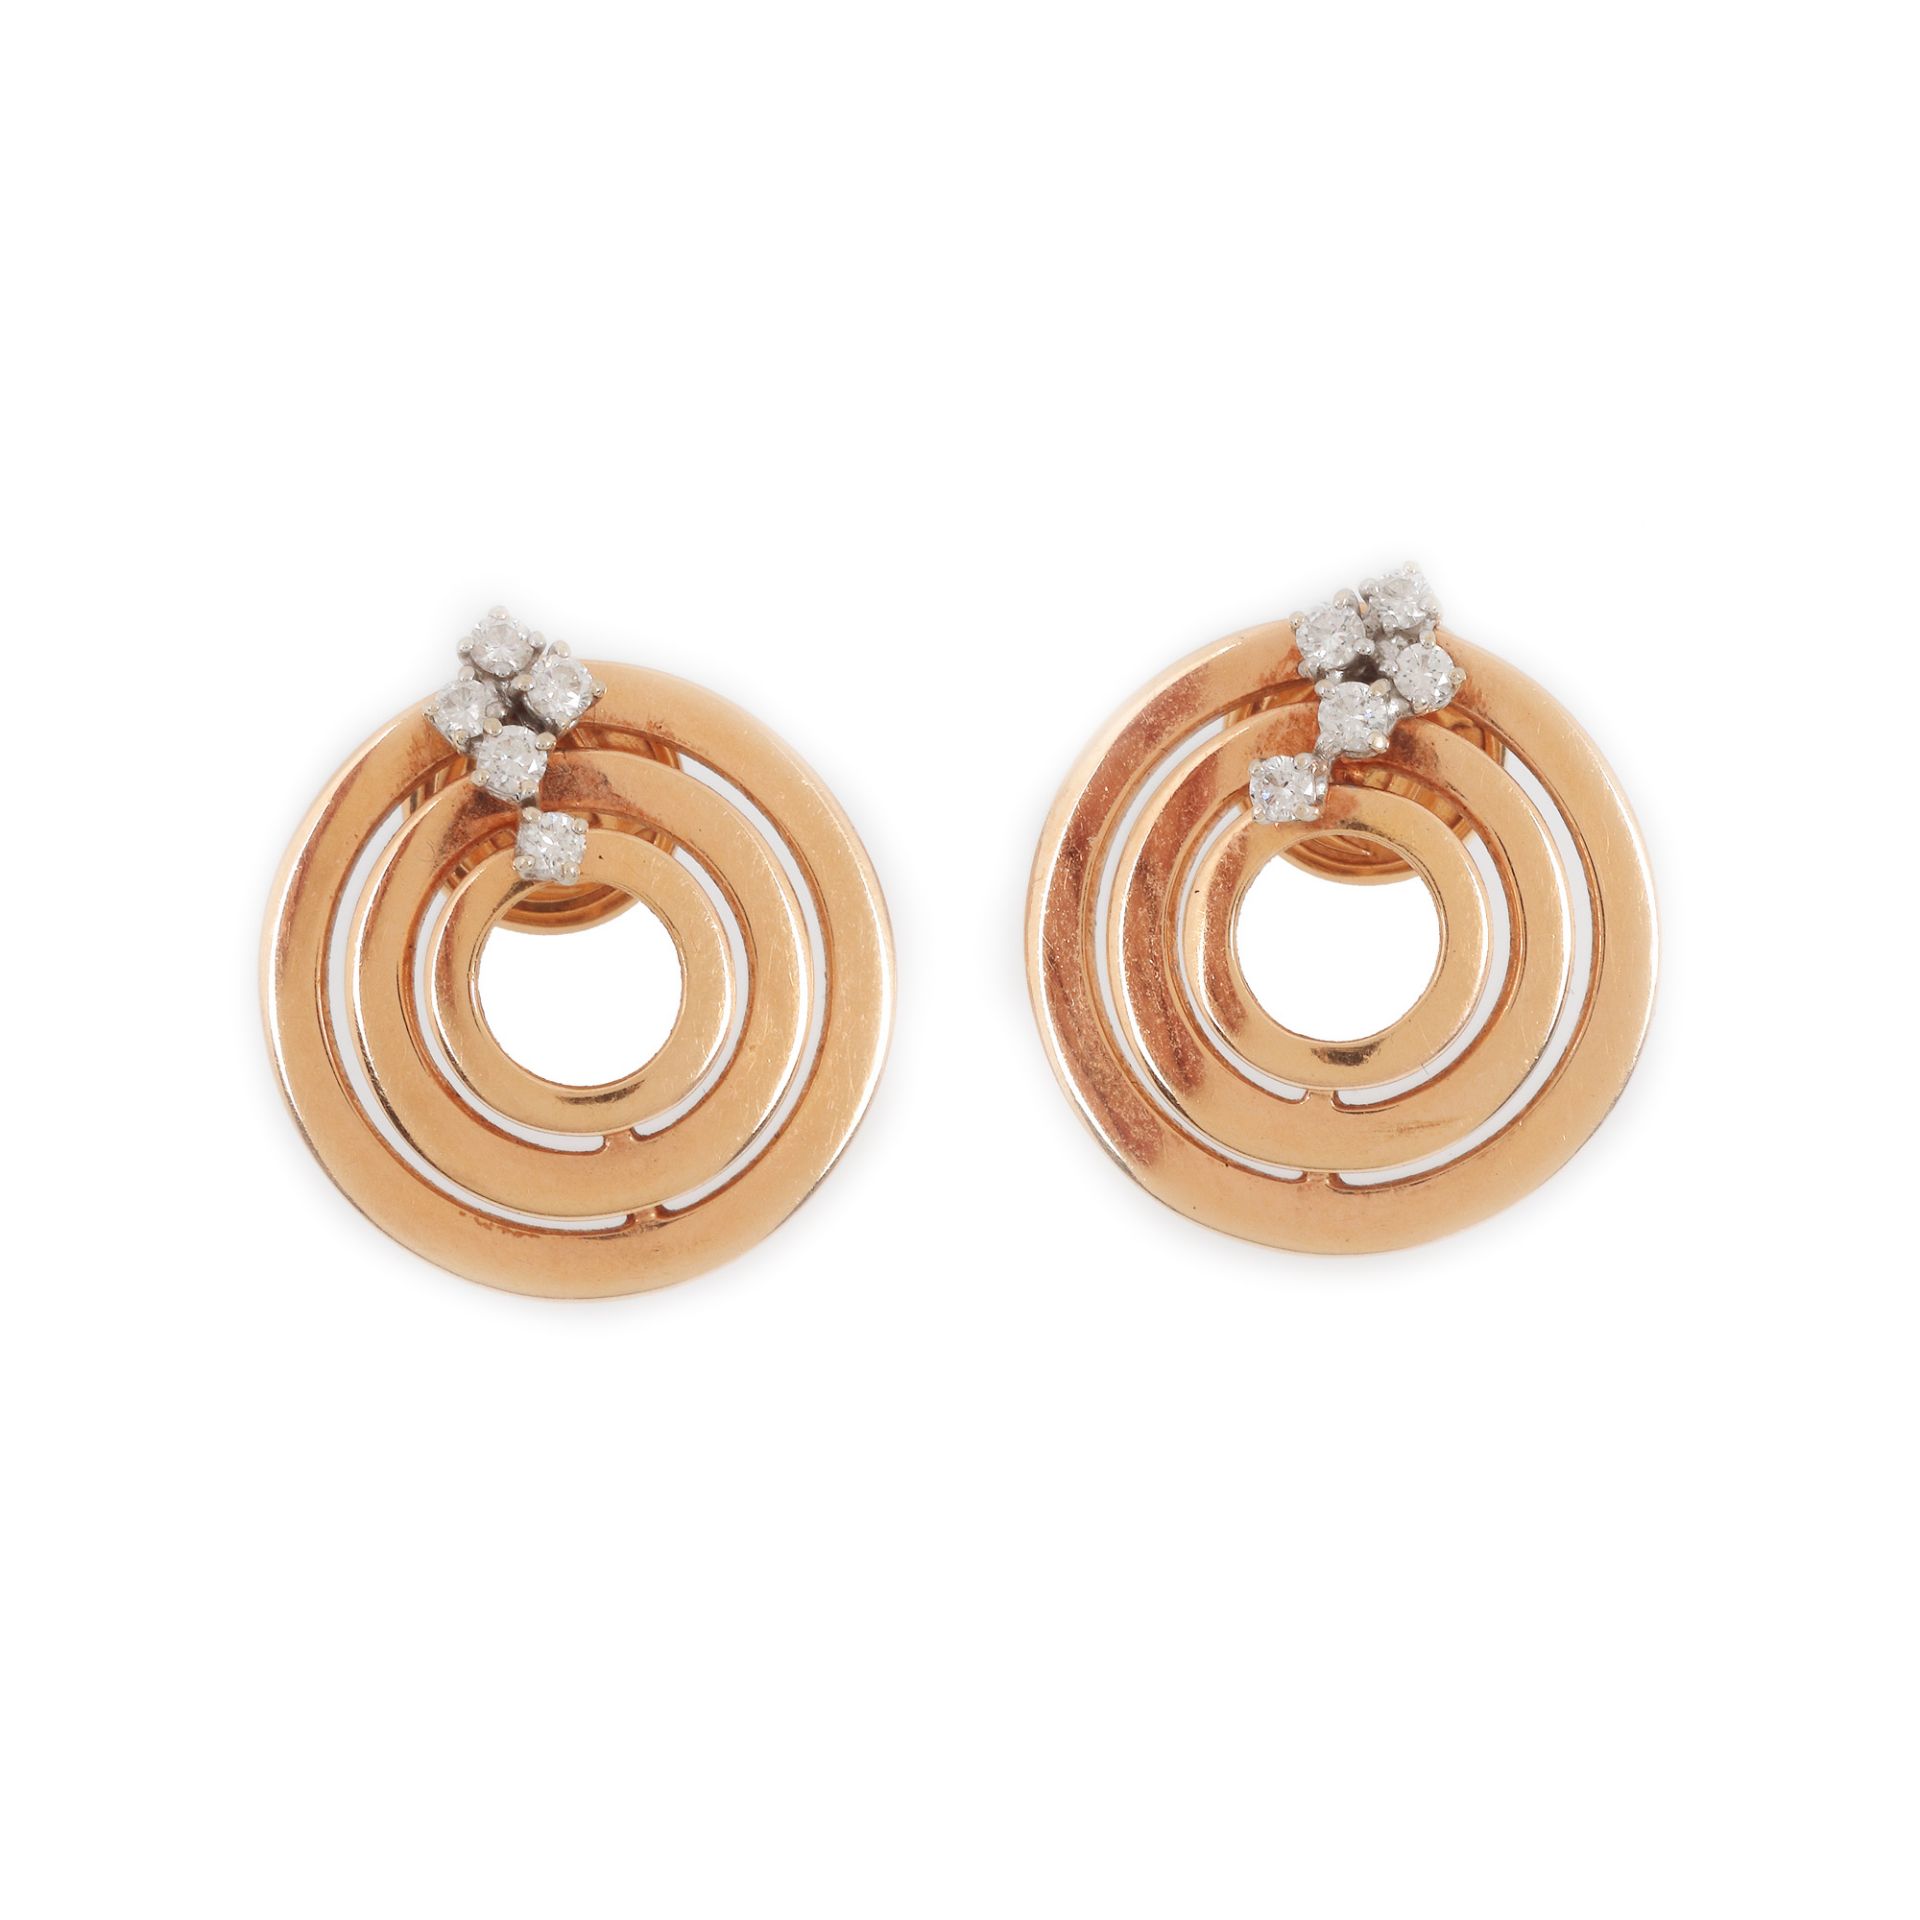 Damiani set, white and rose gold, decorated with diamonds - Image 3 of 5